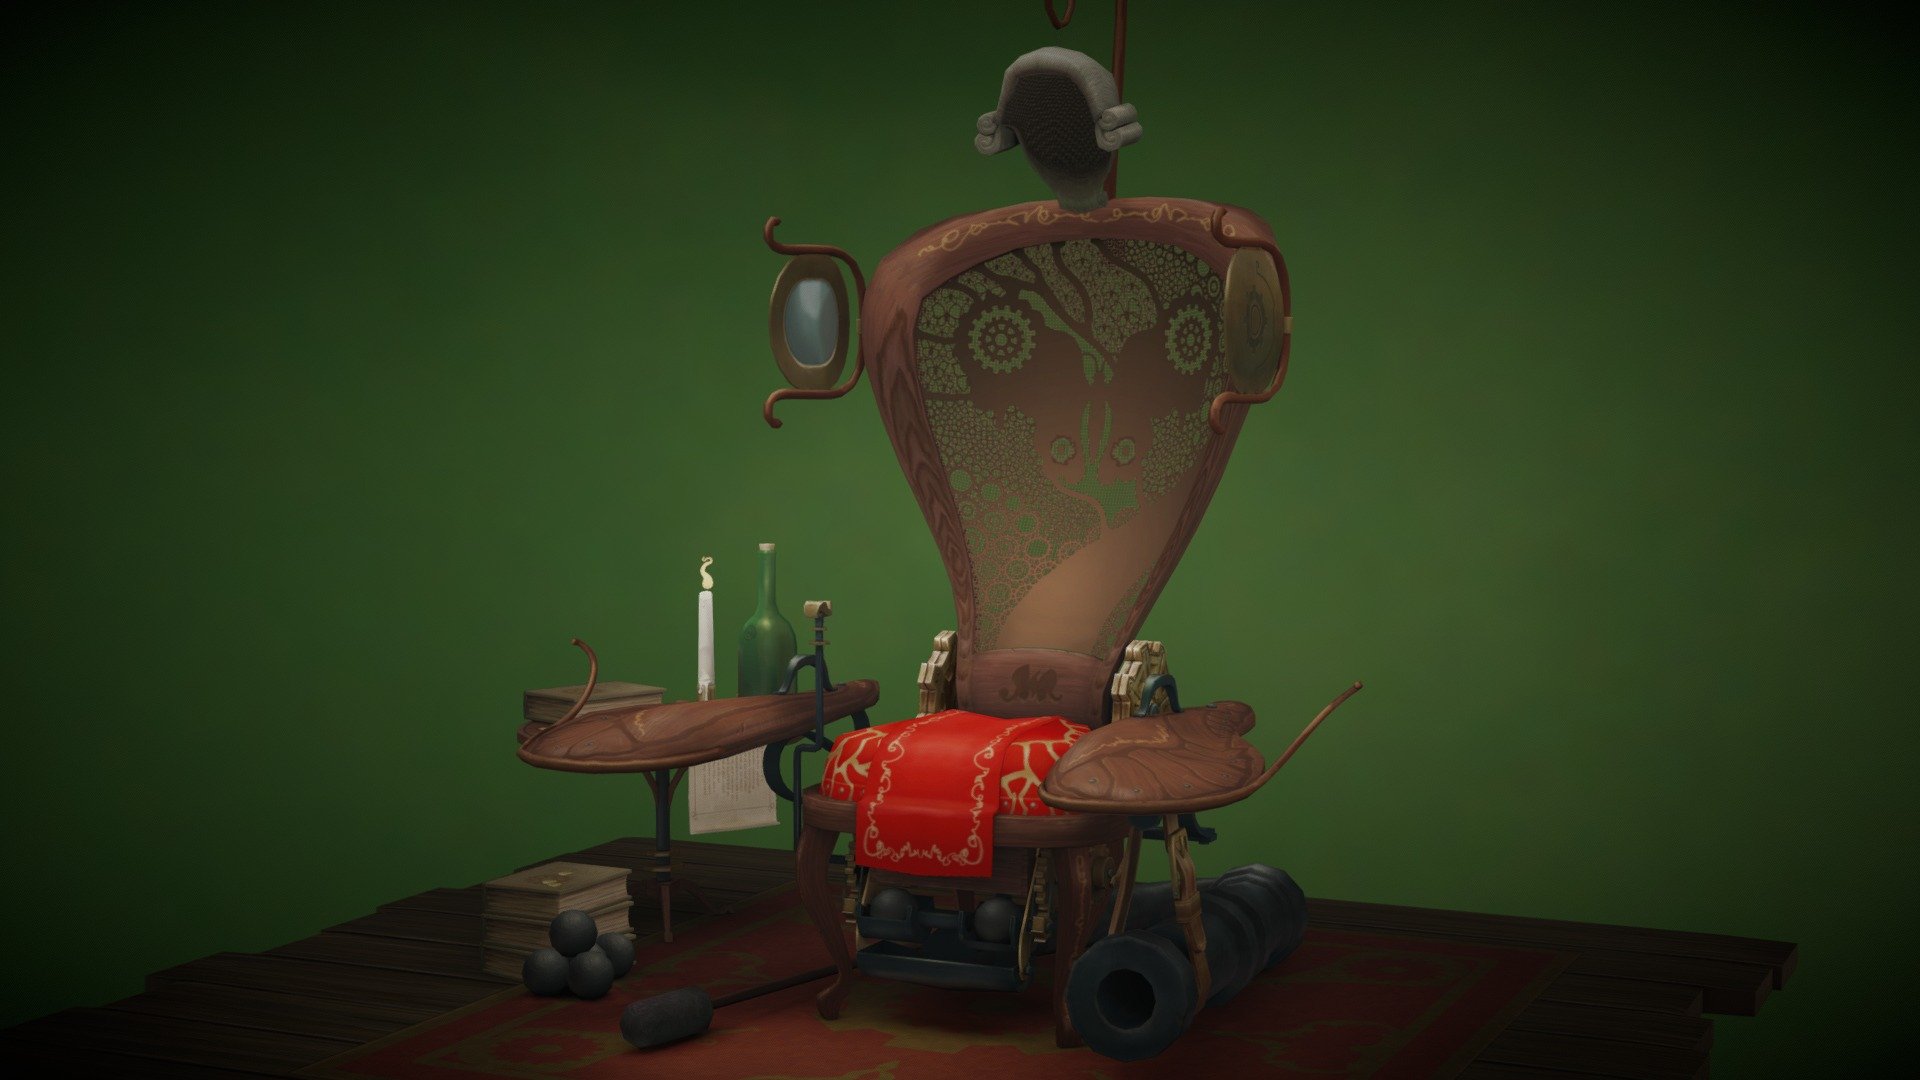 A custom made cannon chair fusing steampunk and art nouveau, for the eccentric 18th century collectors.

Hand painted, diffuse only, low-poly model. I wanted to challenge myself with the painting of various materials like metals, leather, wood, glass, wax etc in such a way that they would look believable 3d model